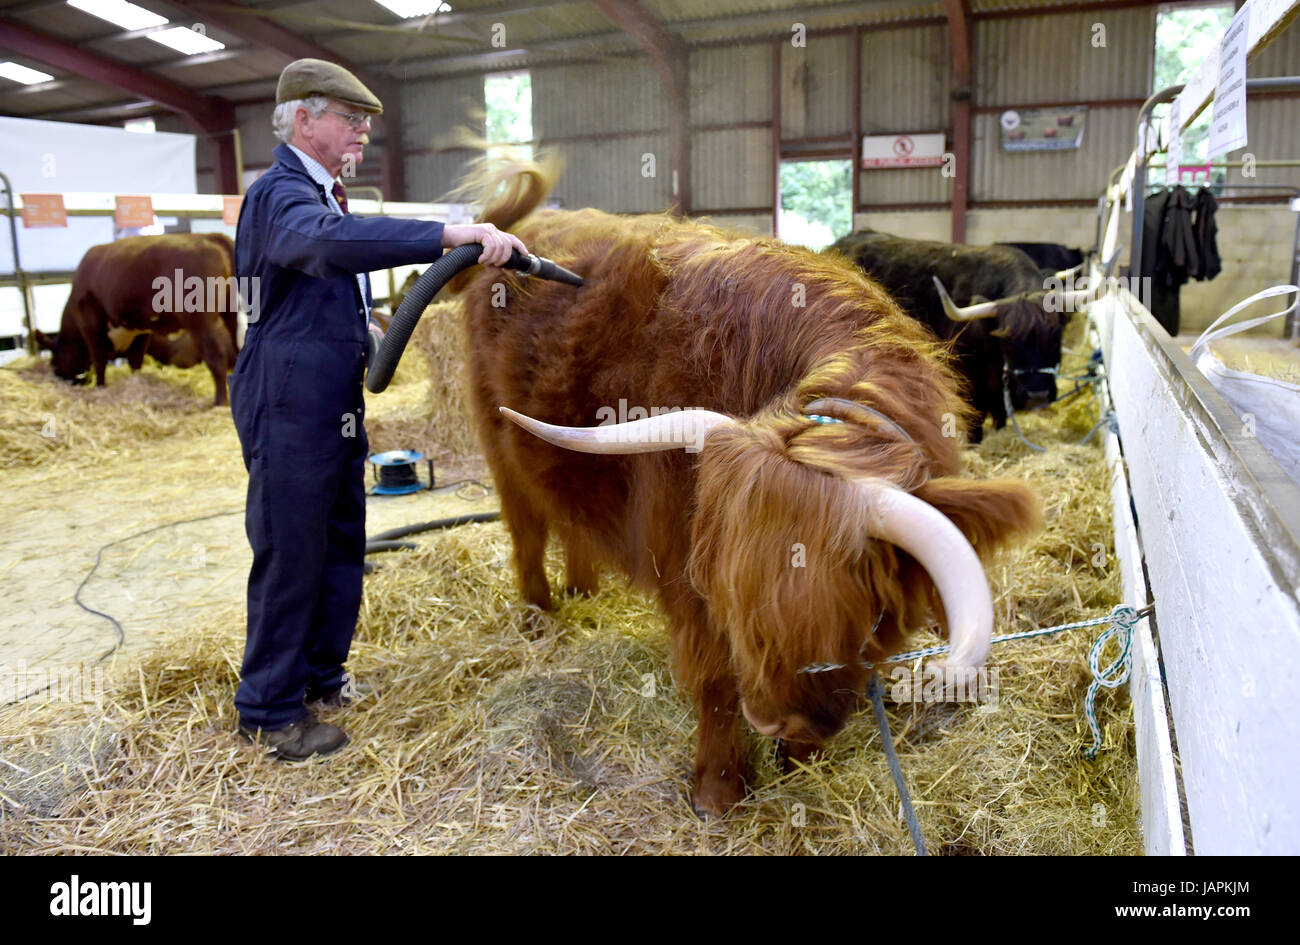 British Farming Industry High Resolution Stock Photography And Images Alamy